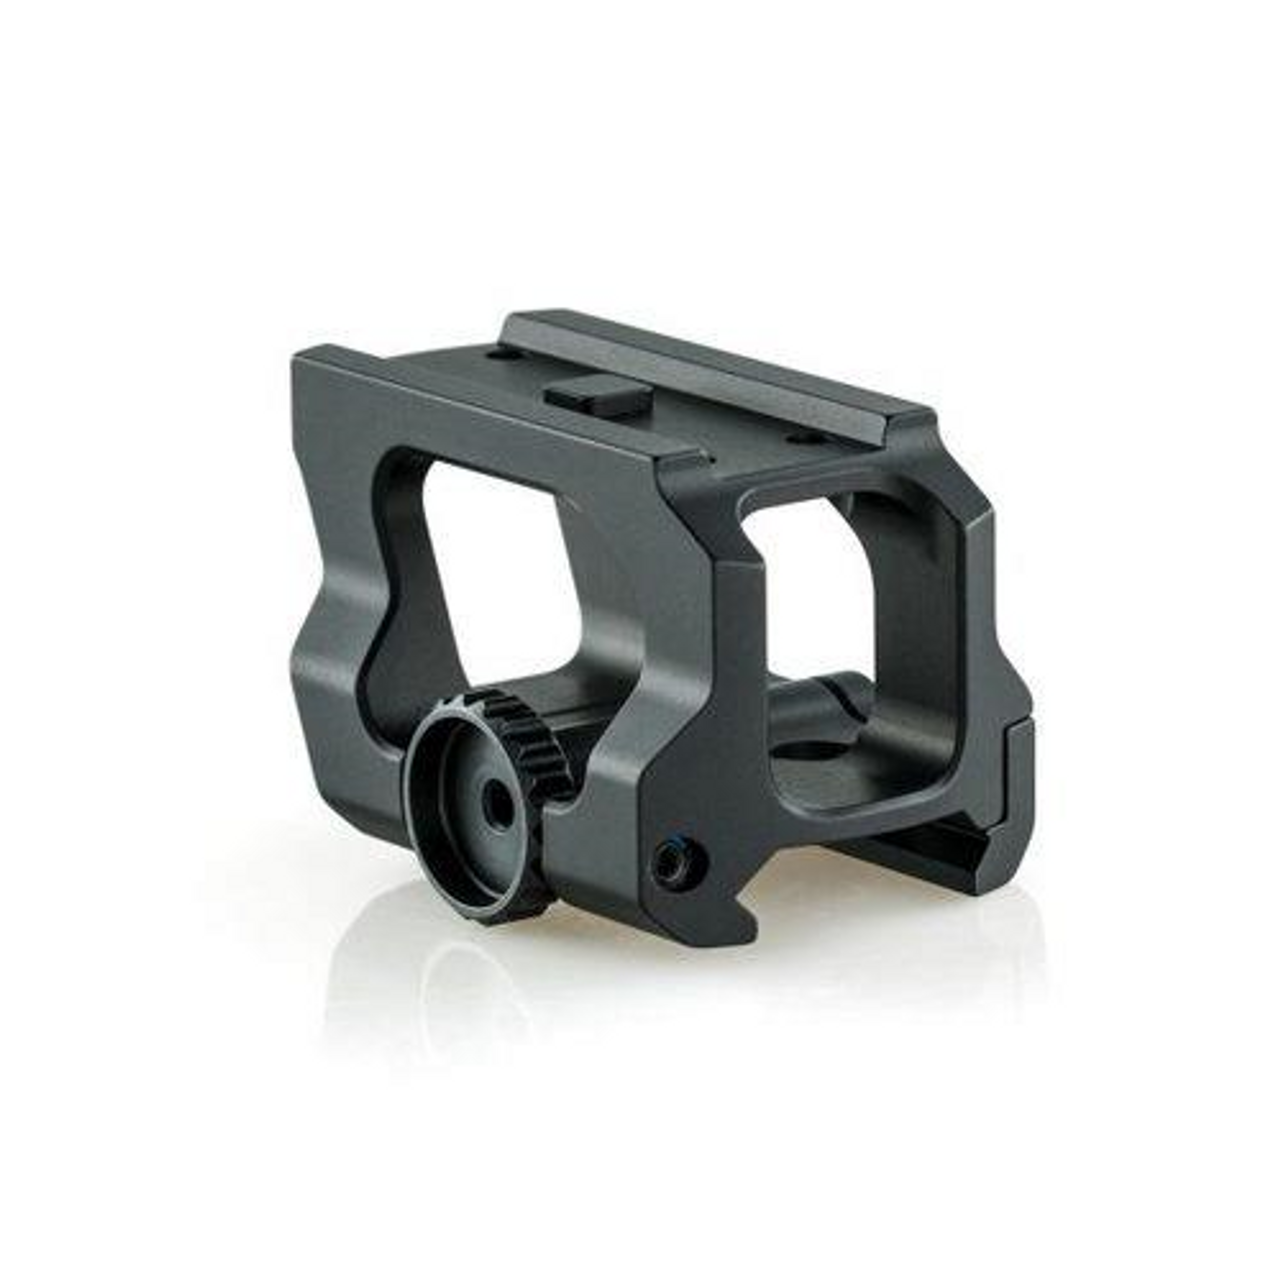 Scalarworks - LEAP Aimpoint Micro Mount